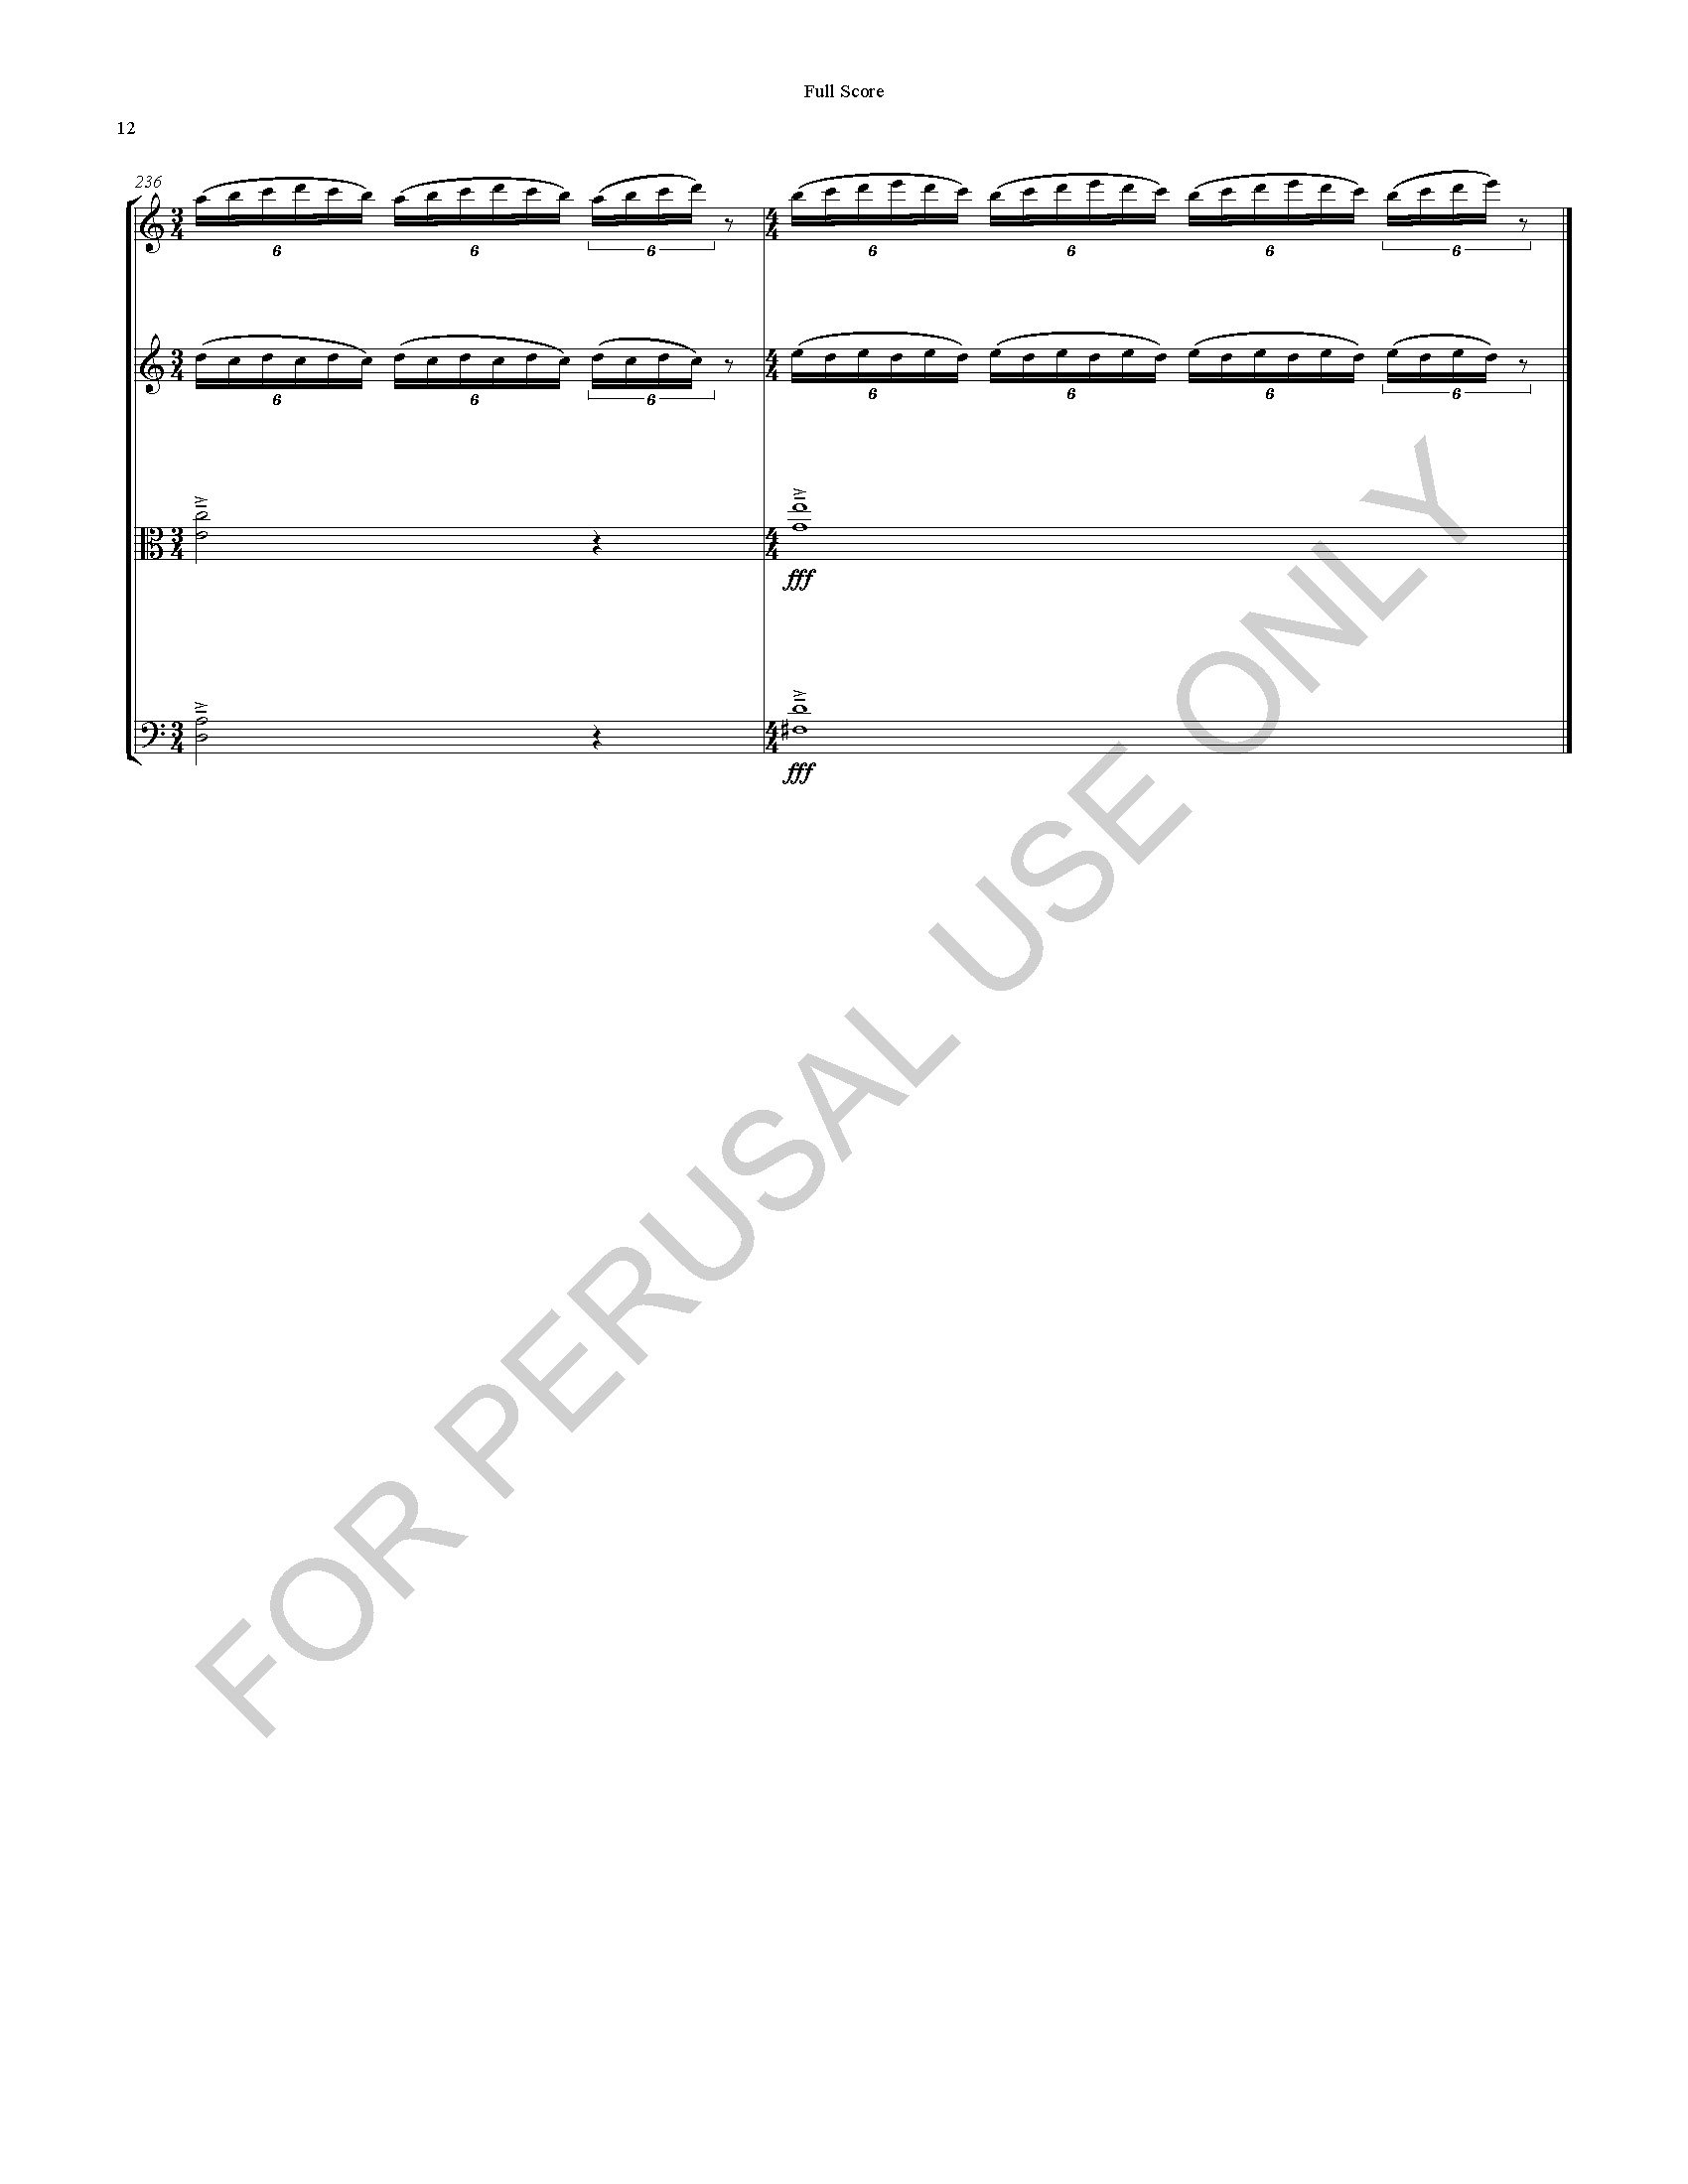 REFERENCE Smear Music (Full Score)_Page_12.jpg